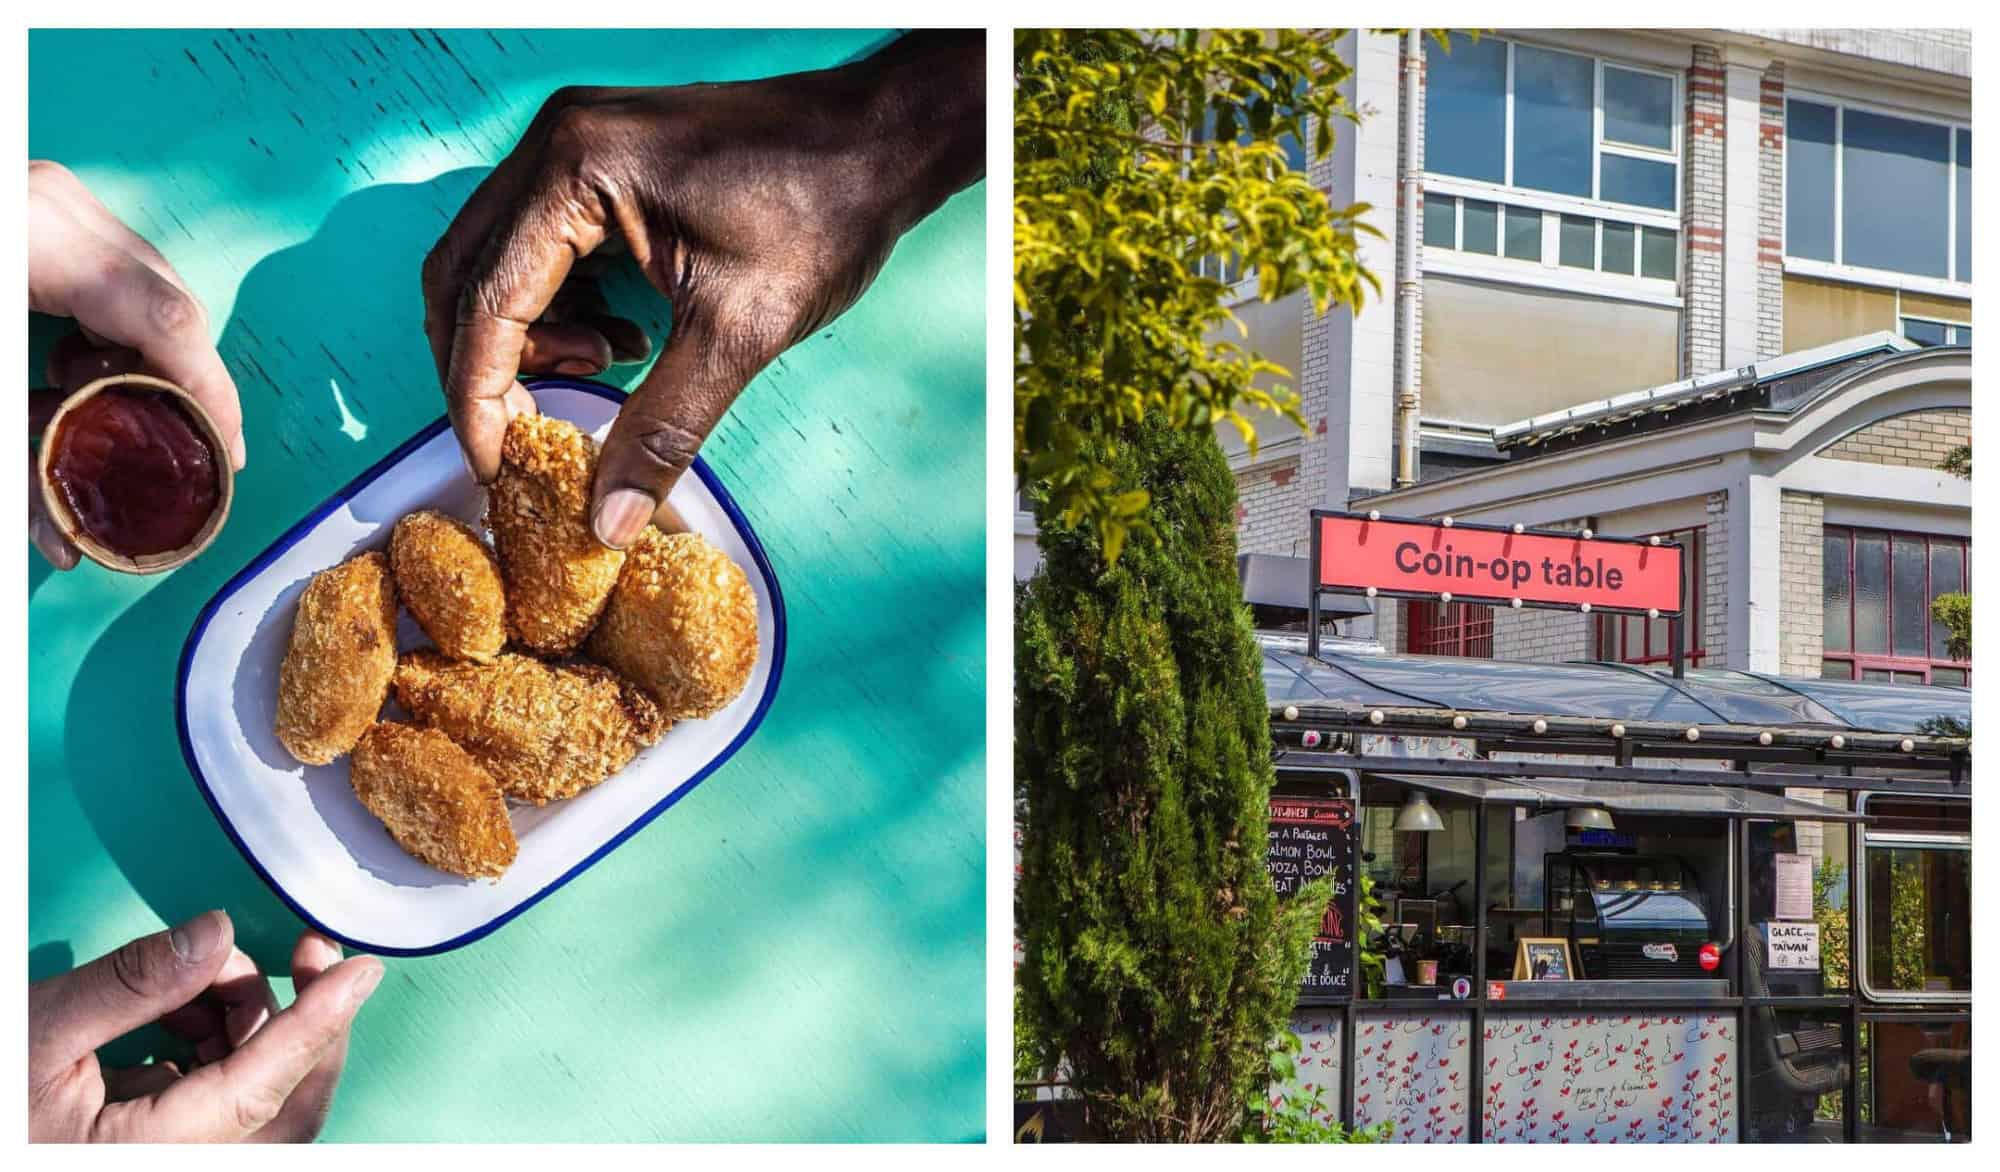 Left: Two hands are picking a white plate filled with brown chicken nuggets. Right: In front of a restaurant's take-out counter with its cashier's desk and the restaurant menu boards.